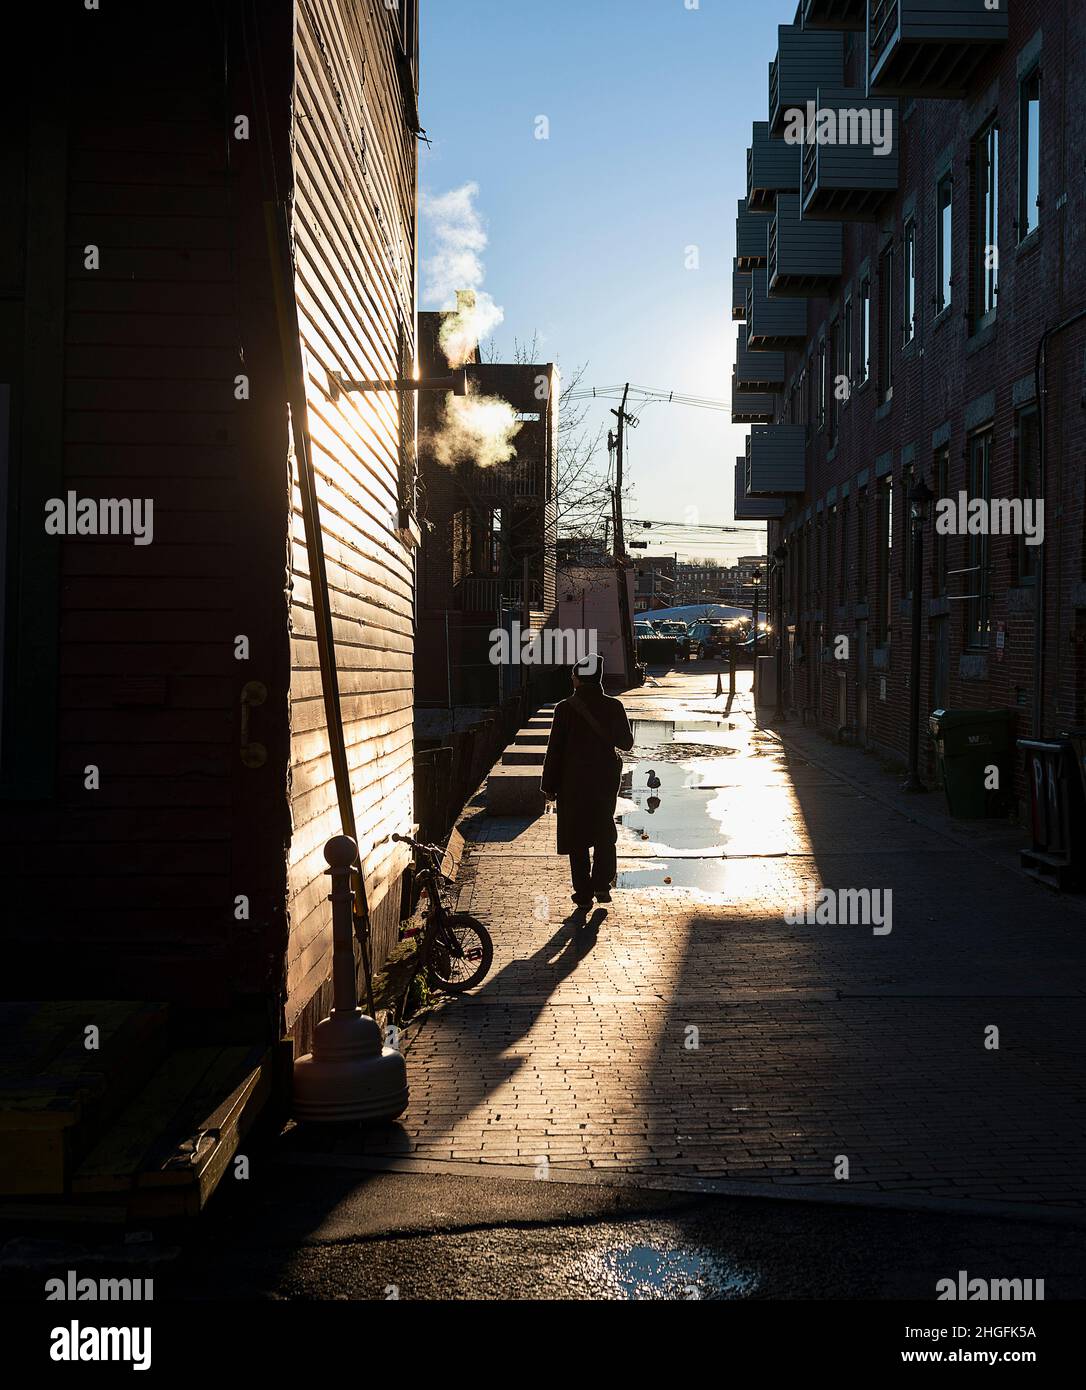 A person in silhouette walking through the Old Port area of Portland, Maine. Stock Photo